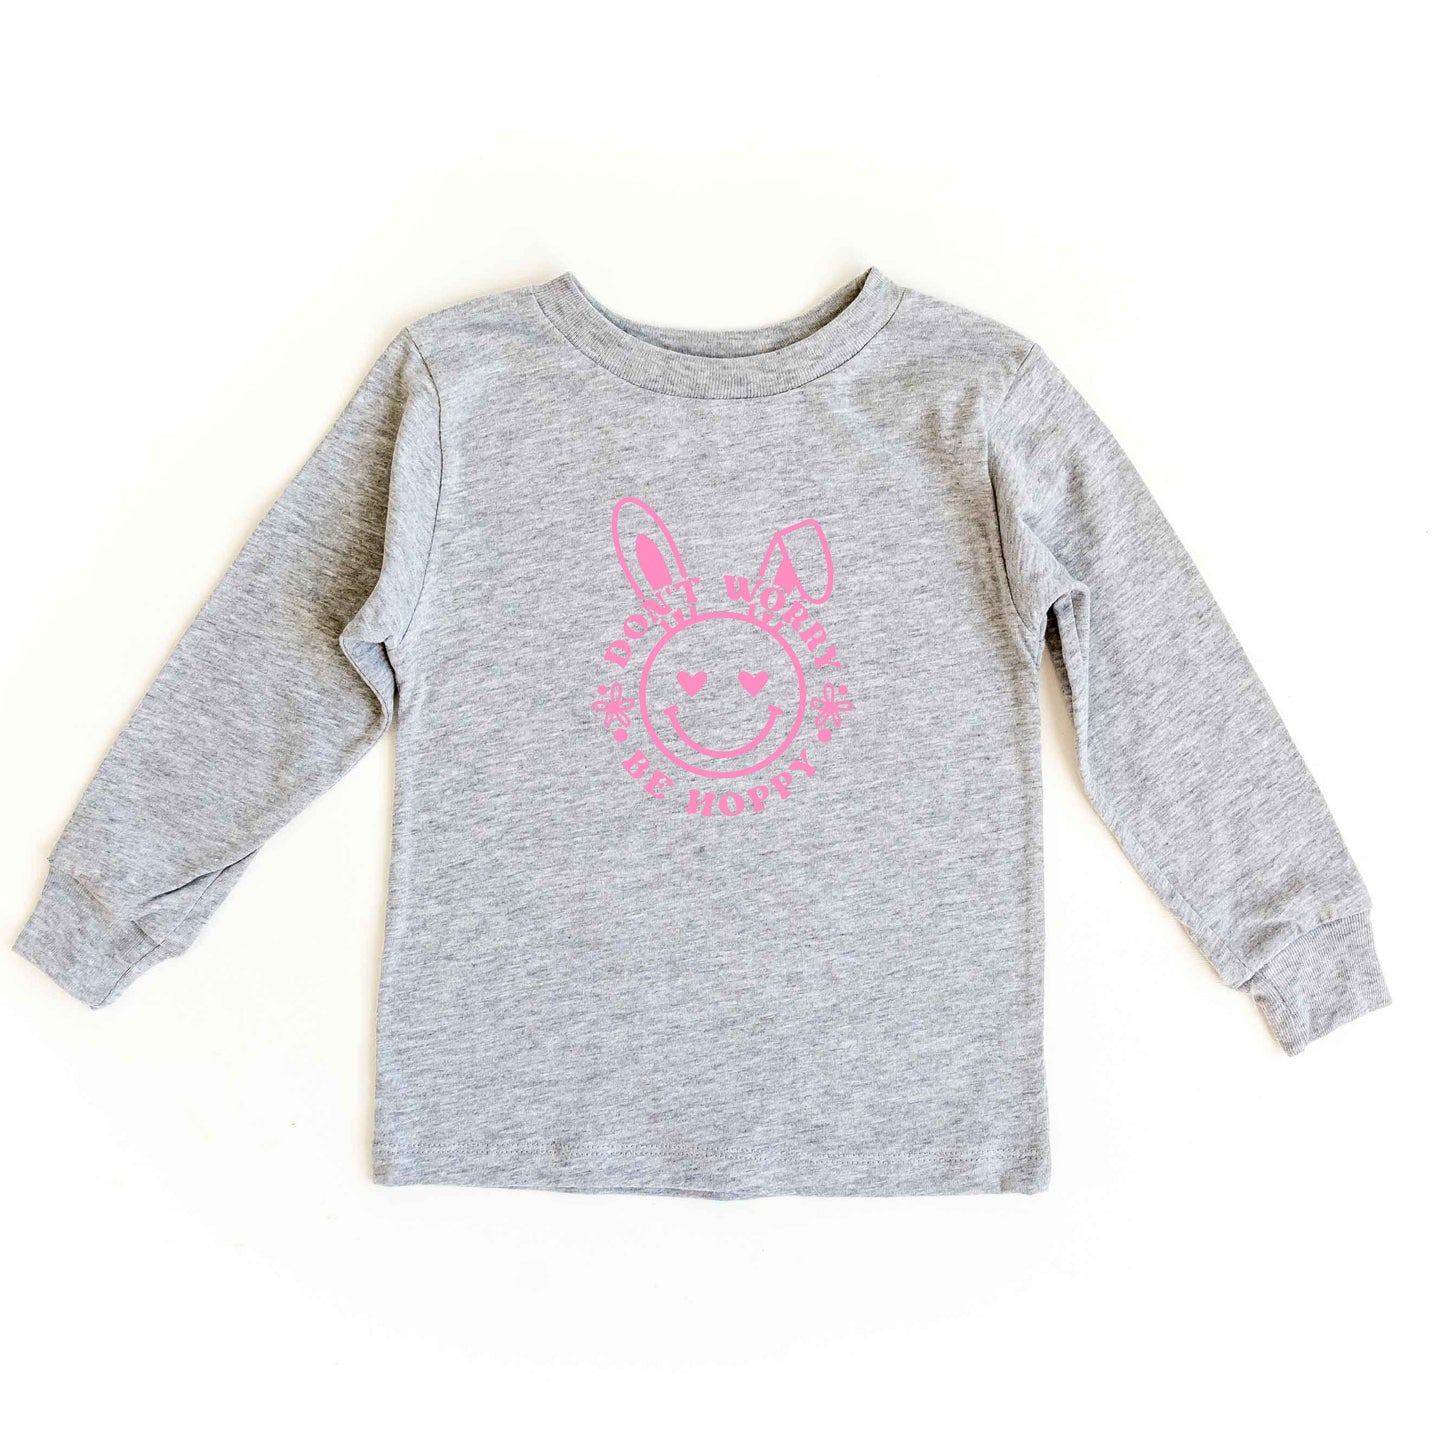 Don't Worry Be Hoppy Smiley Bunny | Toddler Long Sleeve Tee